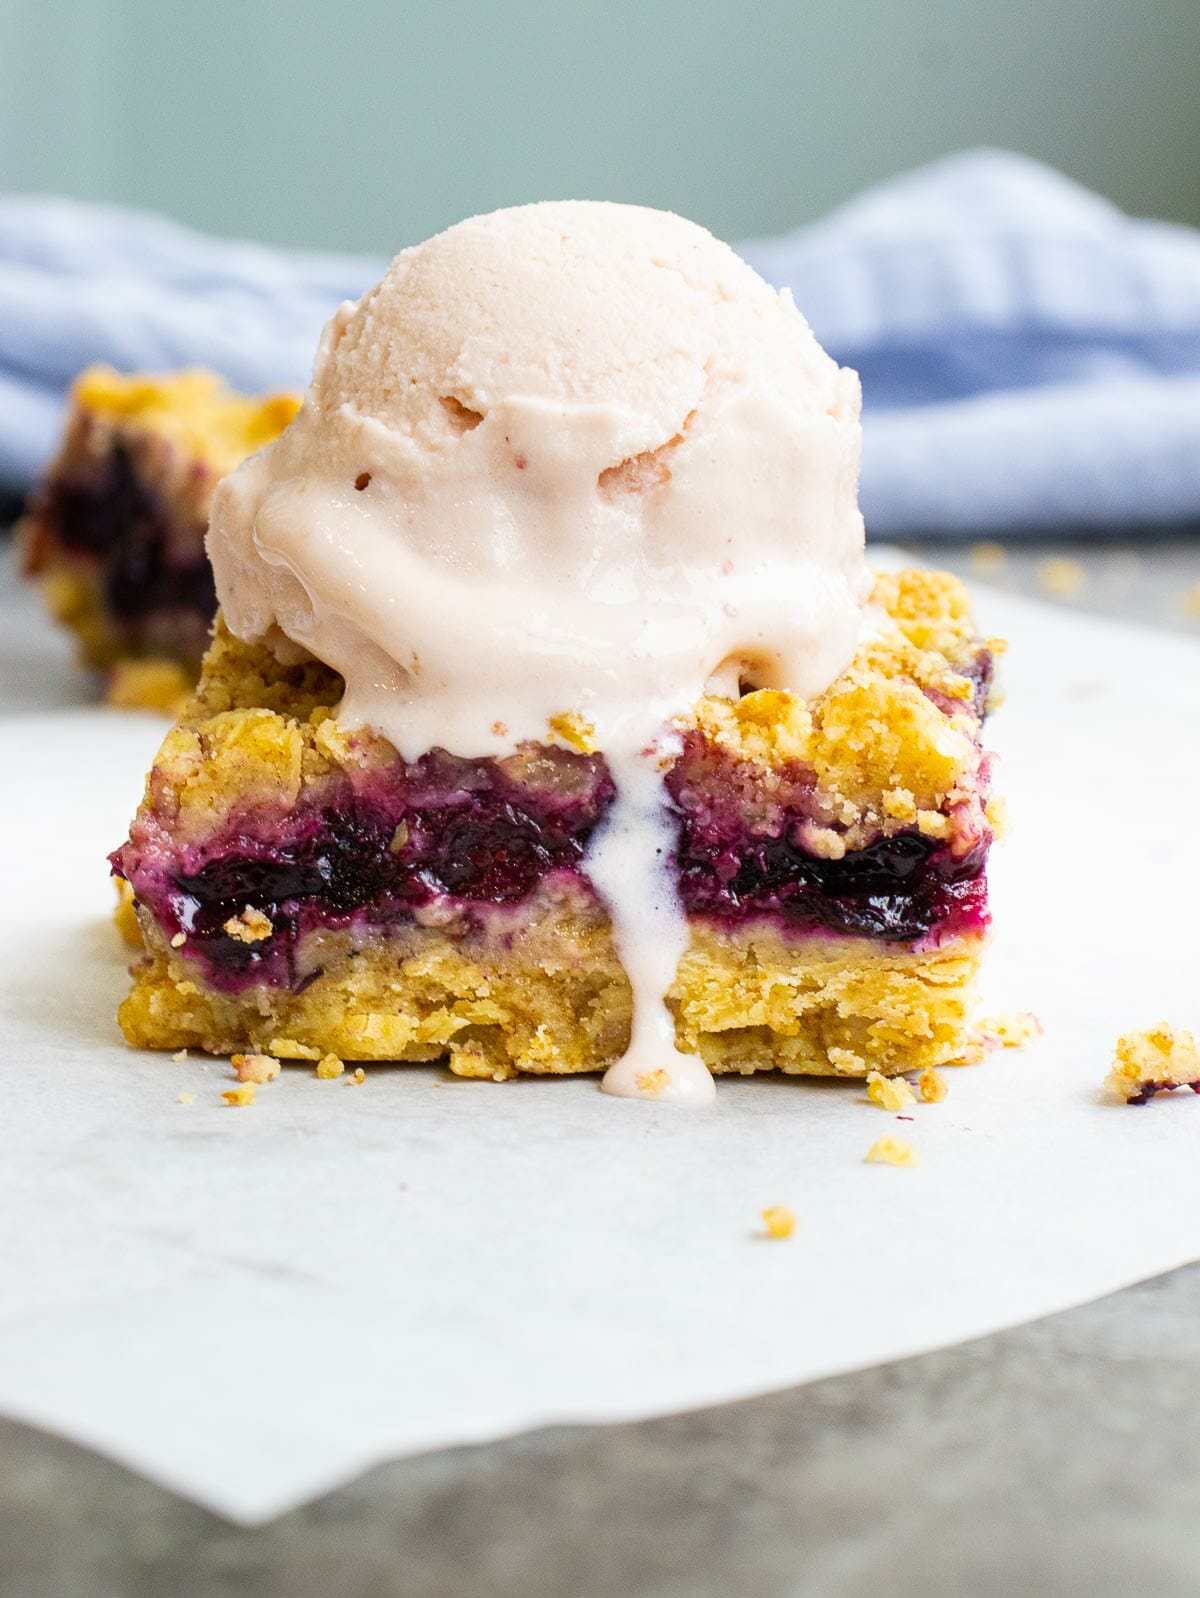 a scoop of ice cream on top of a blueberry crumble bar